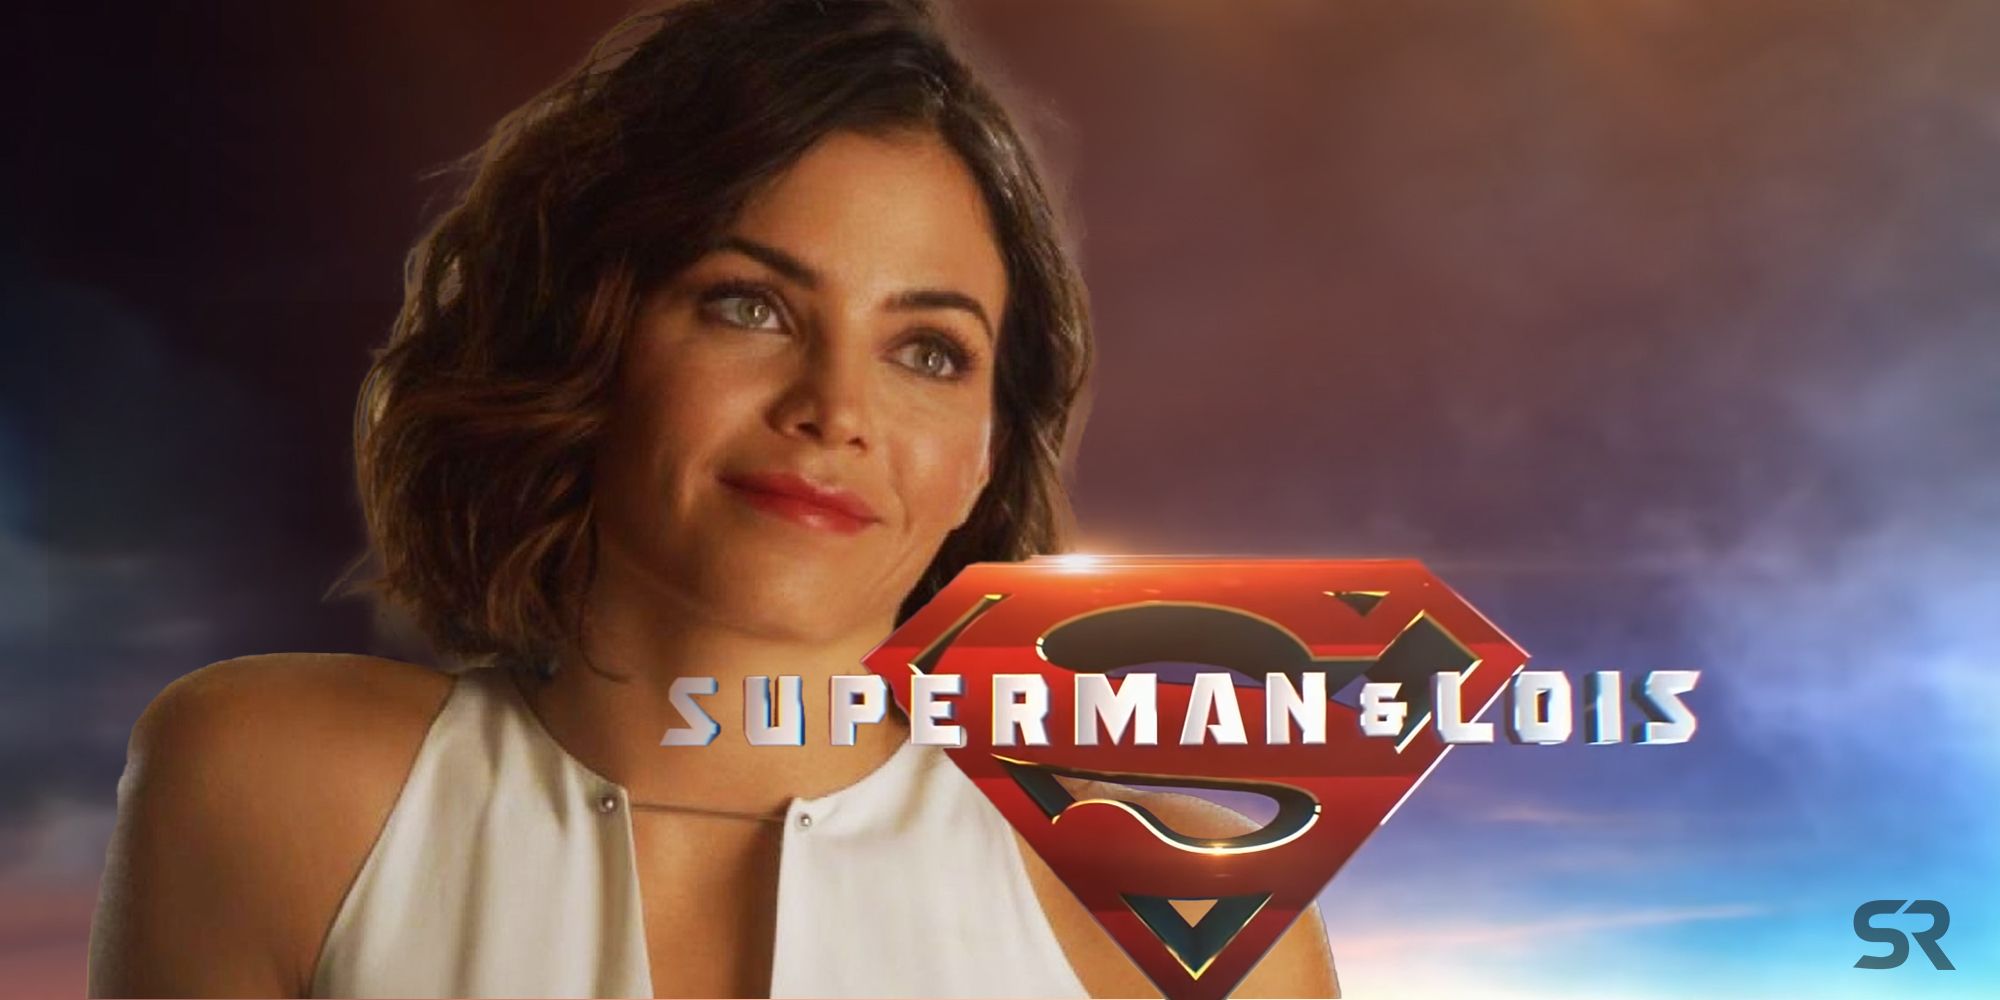 Superman & Lois Season 2 Image Reveals First Look At Arrowverses Lucy Lane